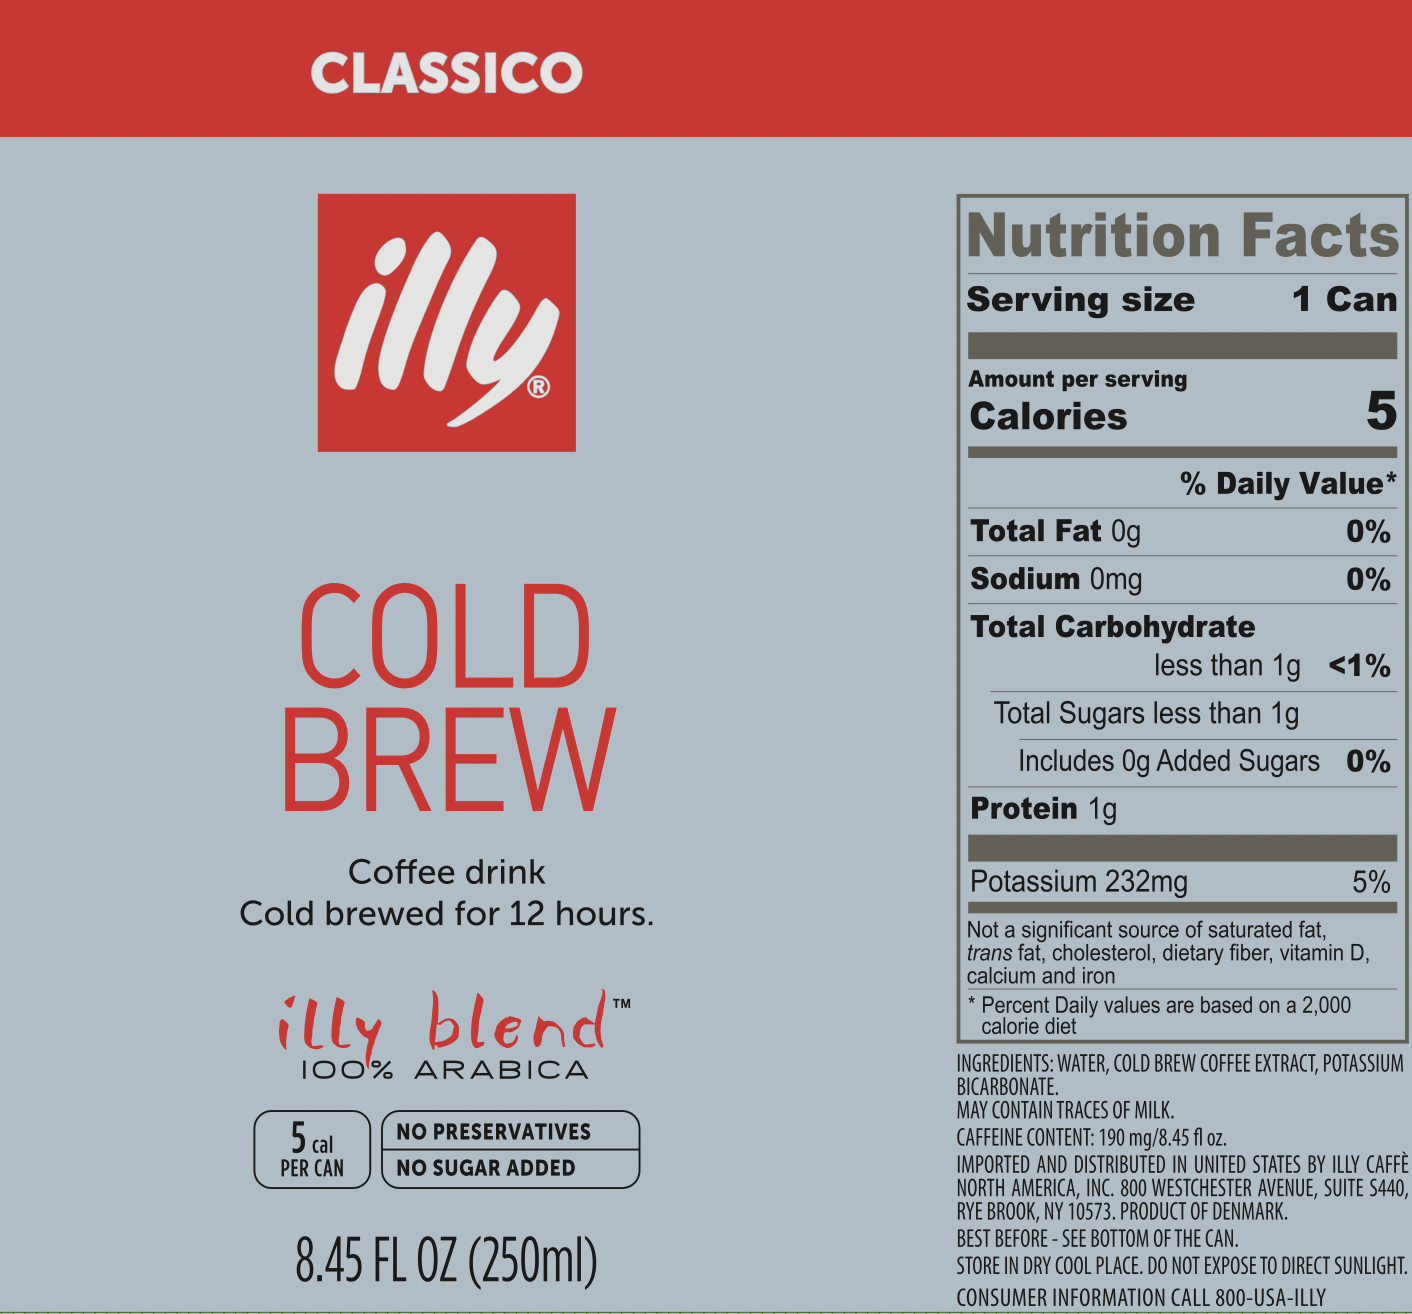 illy Ready To Drink Cold Brew - Paquet de 12